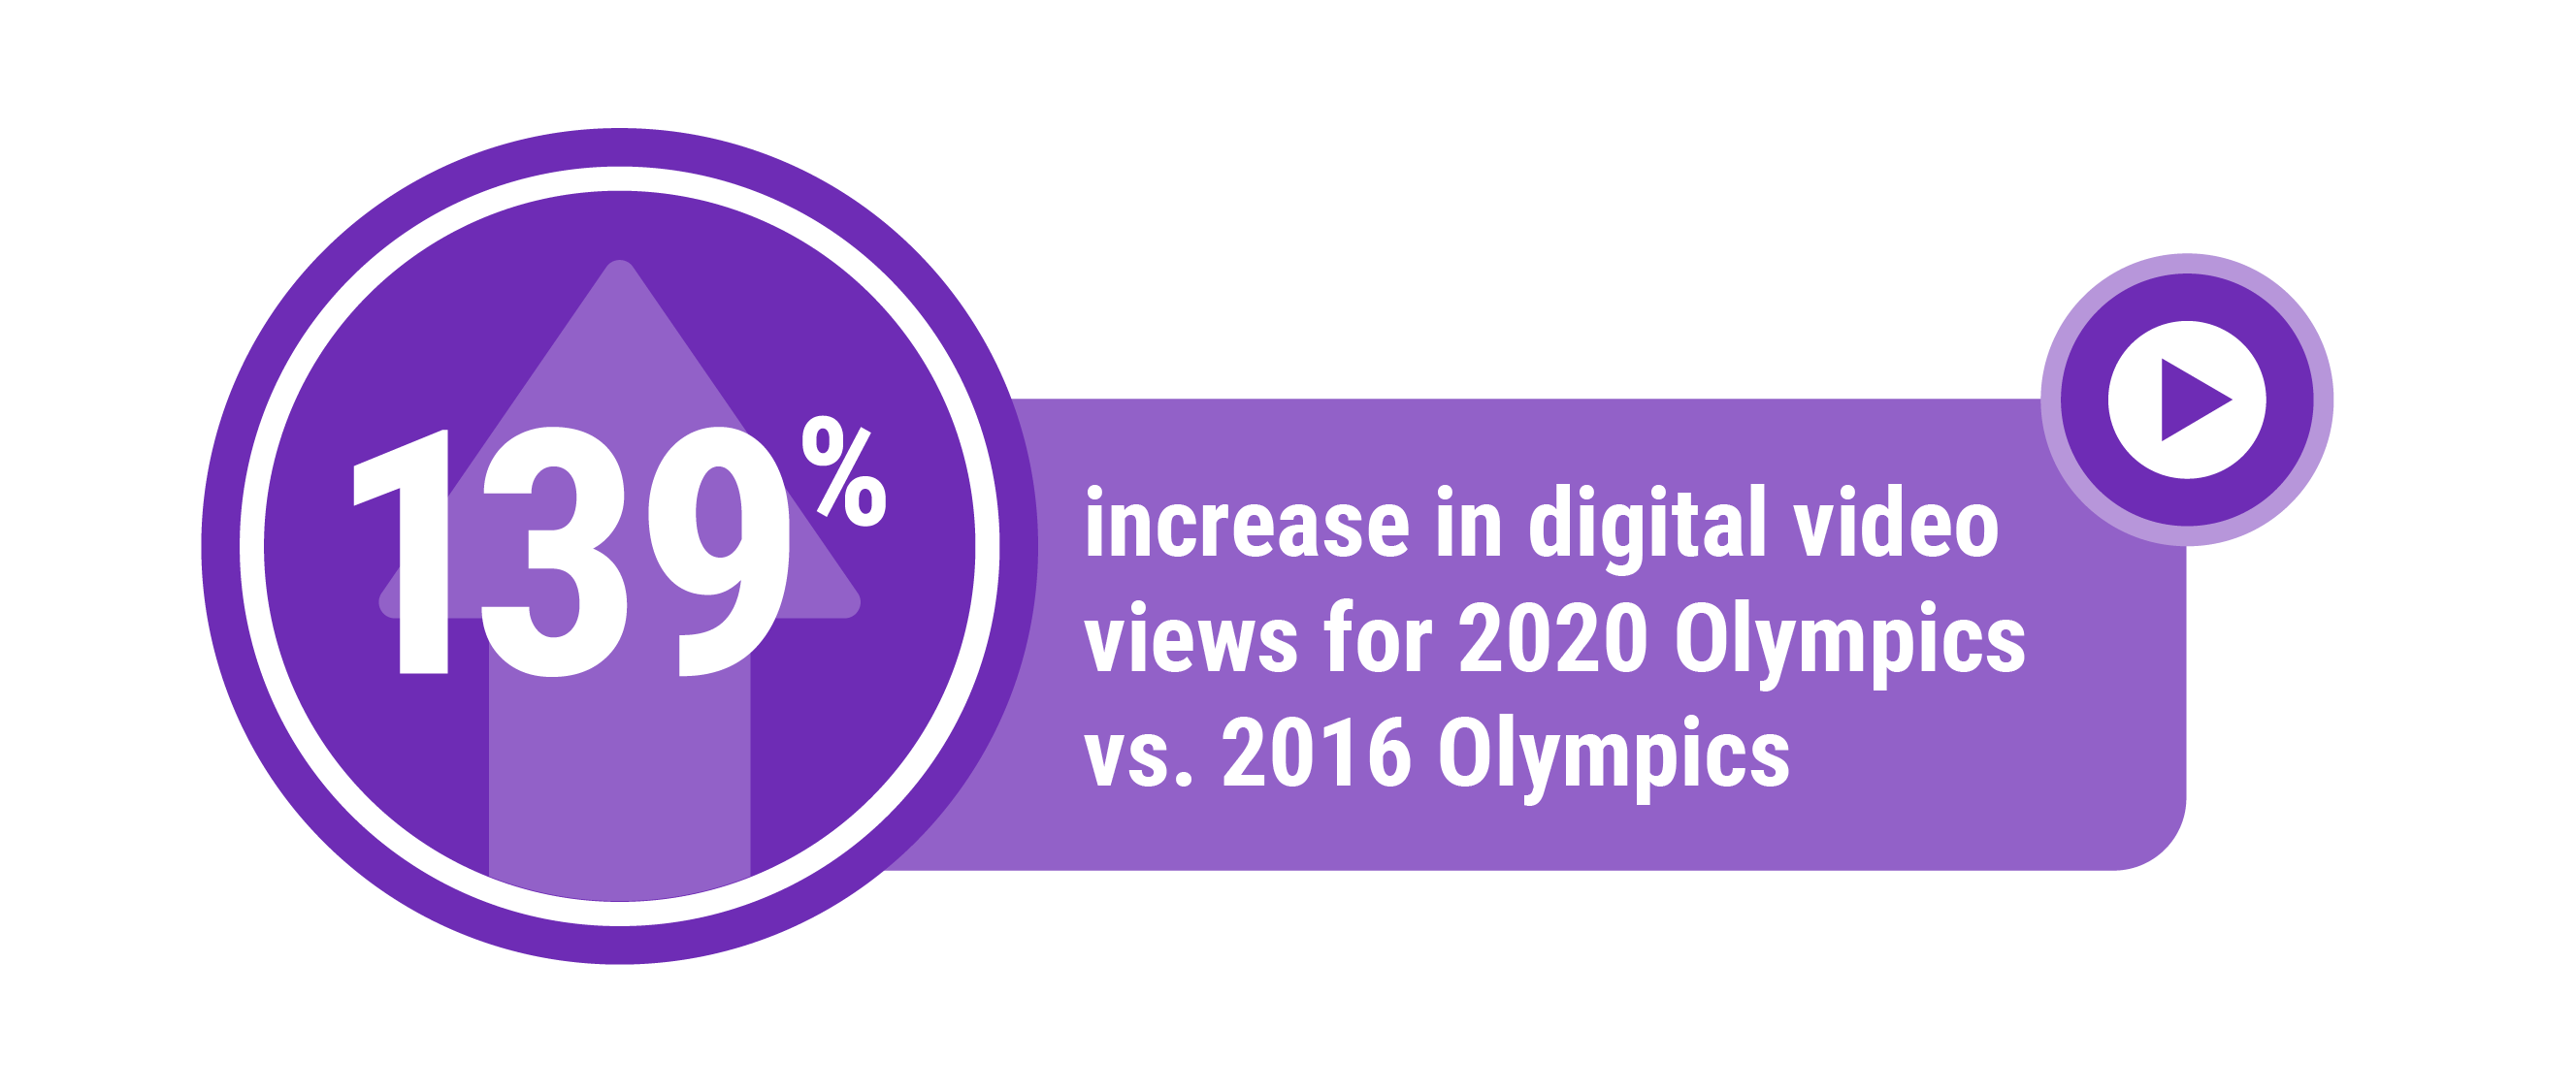 Simple data visualization in the color purple saying that there was a 139% increase in digital video views for 2020 Olympics vs. 2016 Olympics